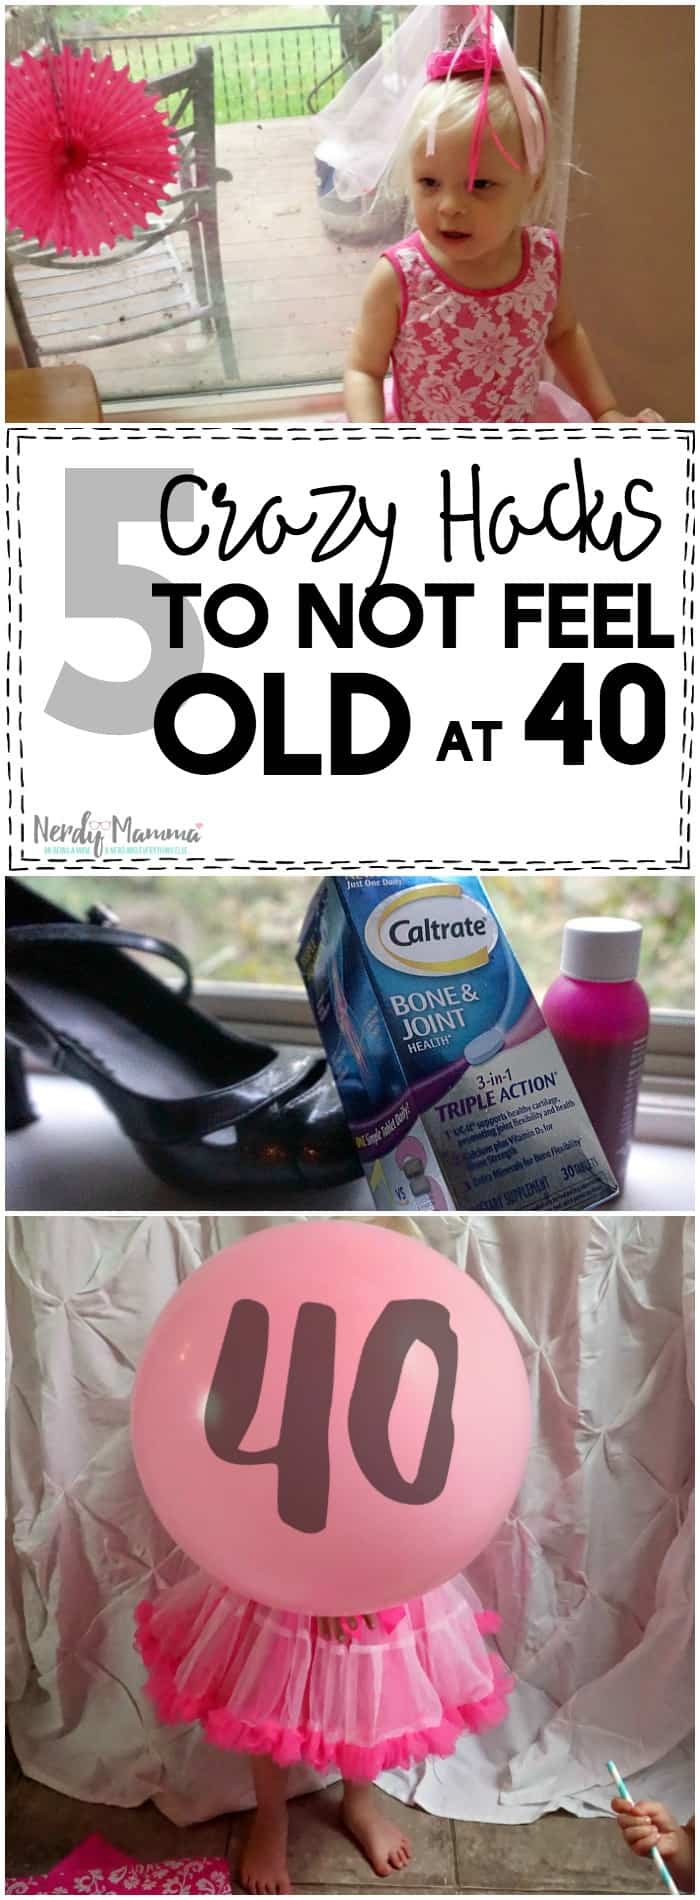 Man, this woman's 5 Crazy Hacks to Not Feel Old when you're 40?! Genius! I love it!